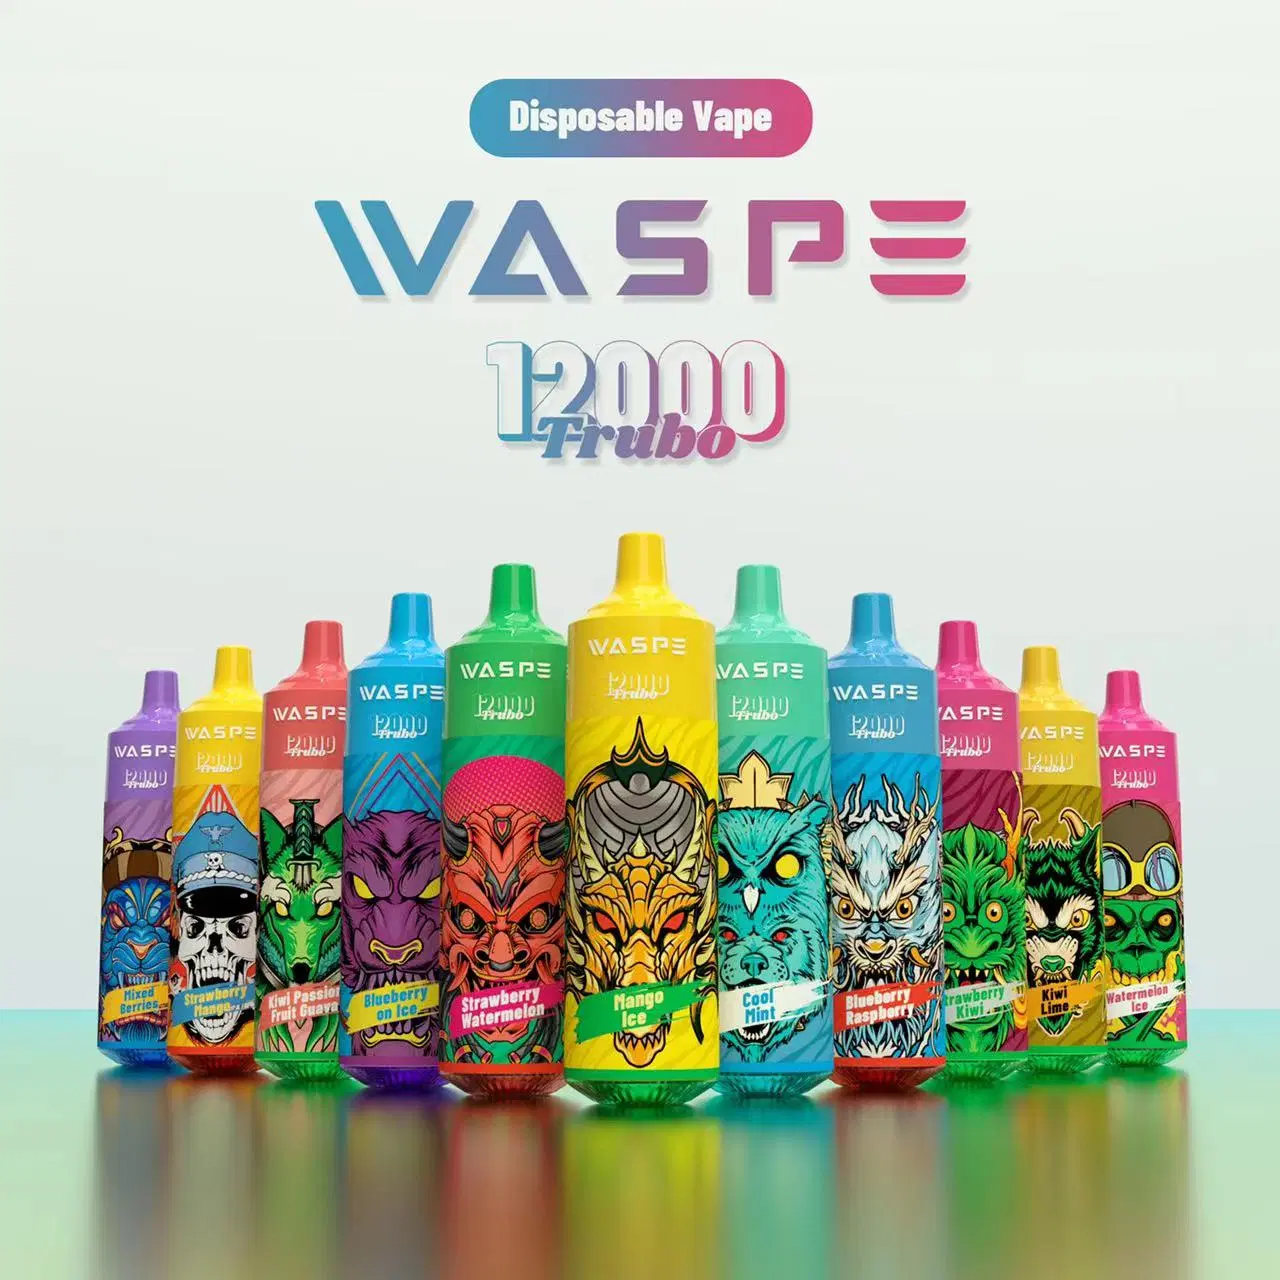 UK Newest Factory Price 12000 Puff 20ml Waspe Great Disposable Vape Electronic Cigarette Disposable Pen